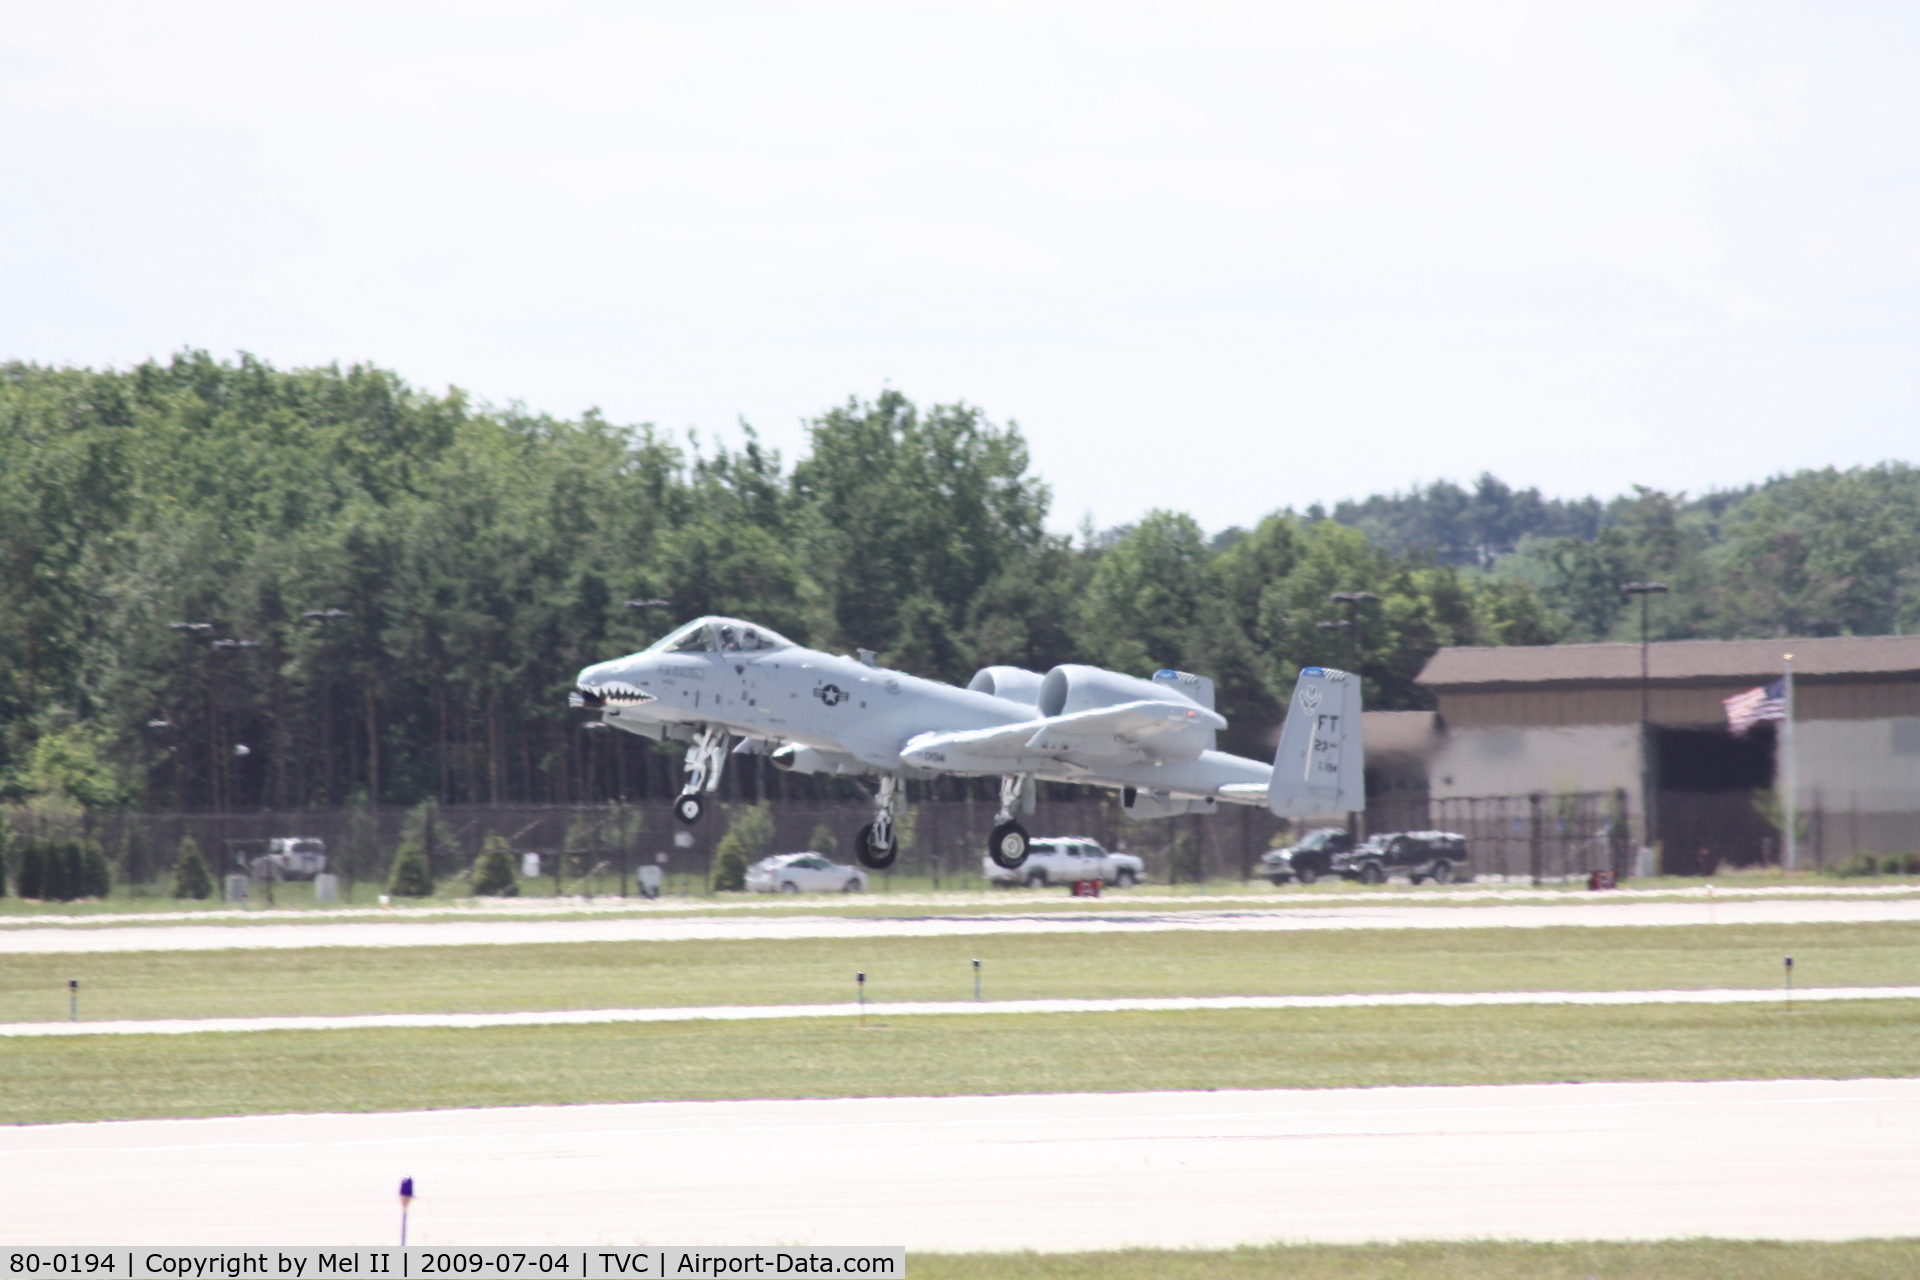 80-0194, 1980 Fairchild Republic A-10C Thunderbolt II C/N A10-0544, From The 23rd Wing, Moody AFB, Departing RWY 10